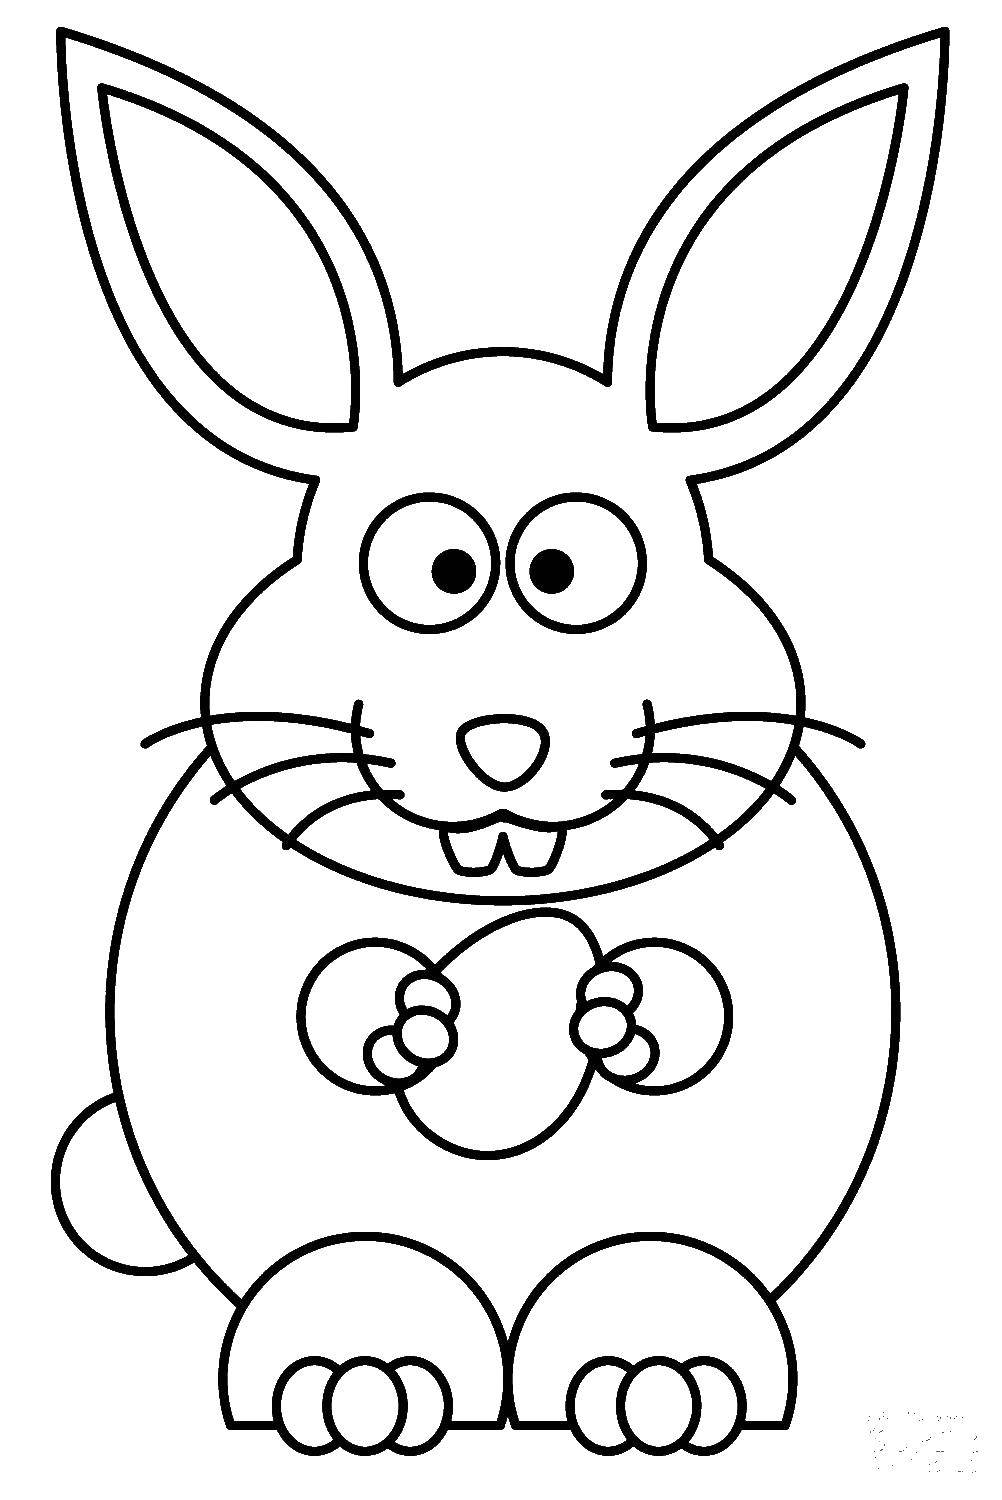 Coloring The Easter Bunny. Category Easter. Tags:  Easter, eggs, patterns, rabbit.